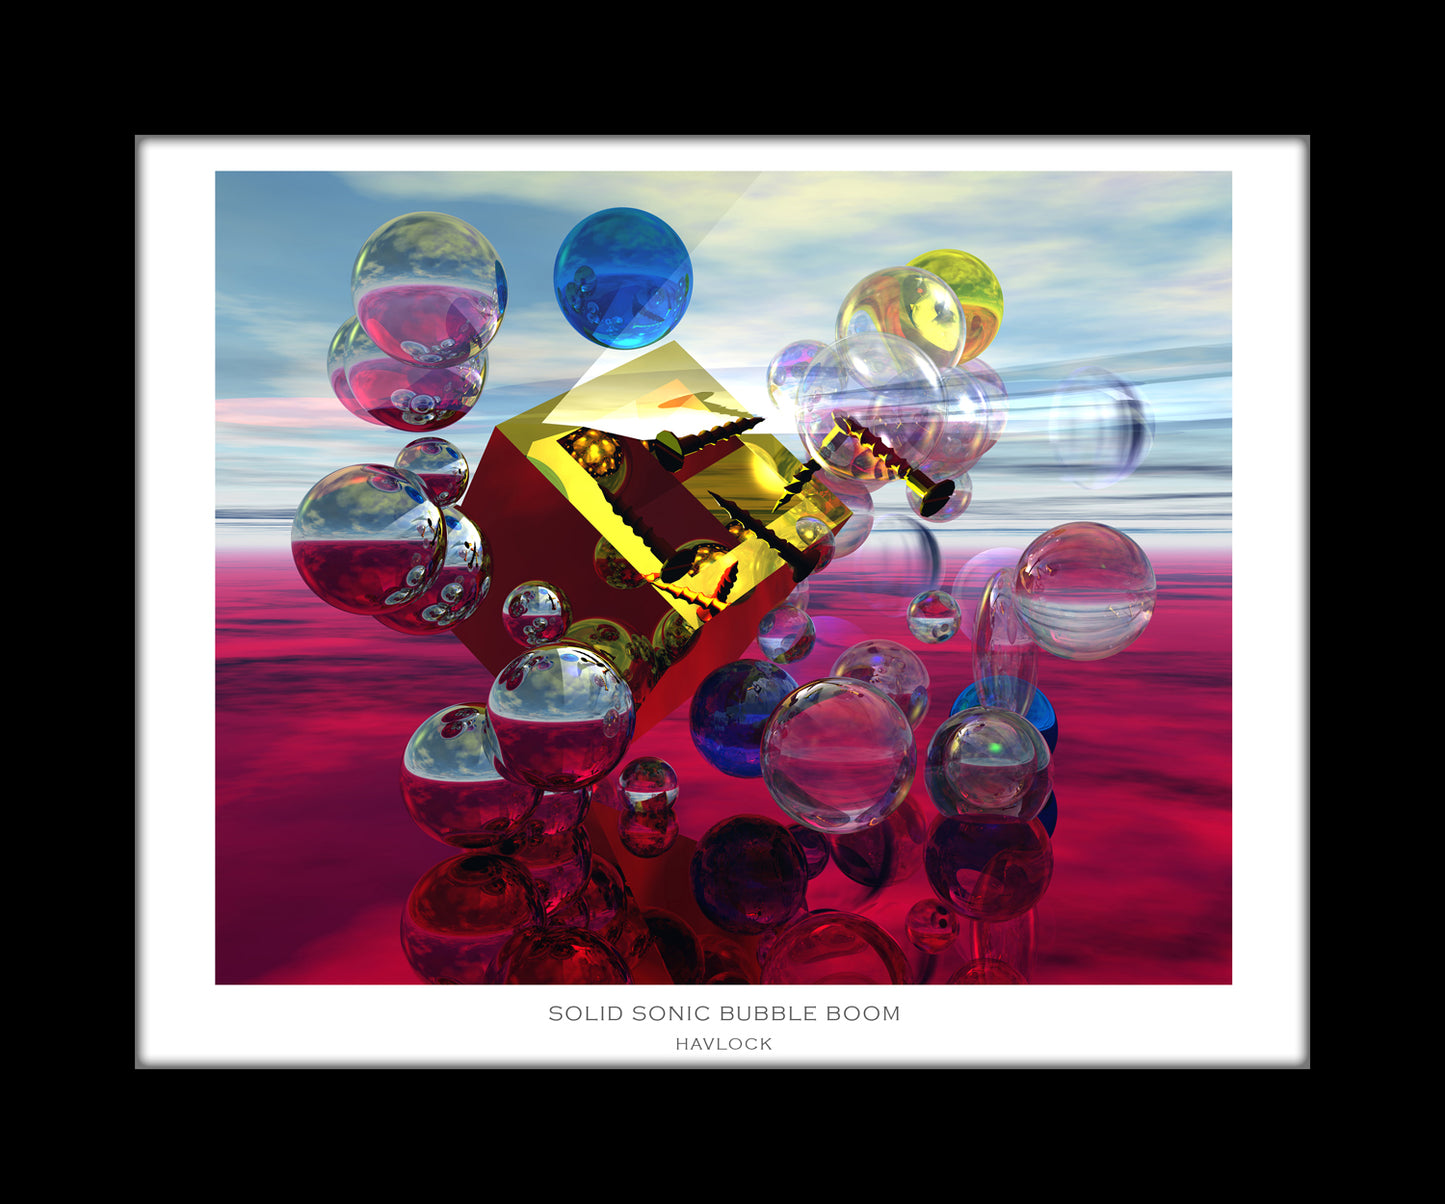 Solid Sonic Bubble Boom ~ Liquid Geometry - 8x10 Print in Collector's Sleeve